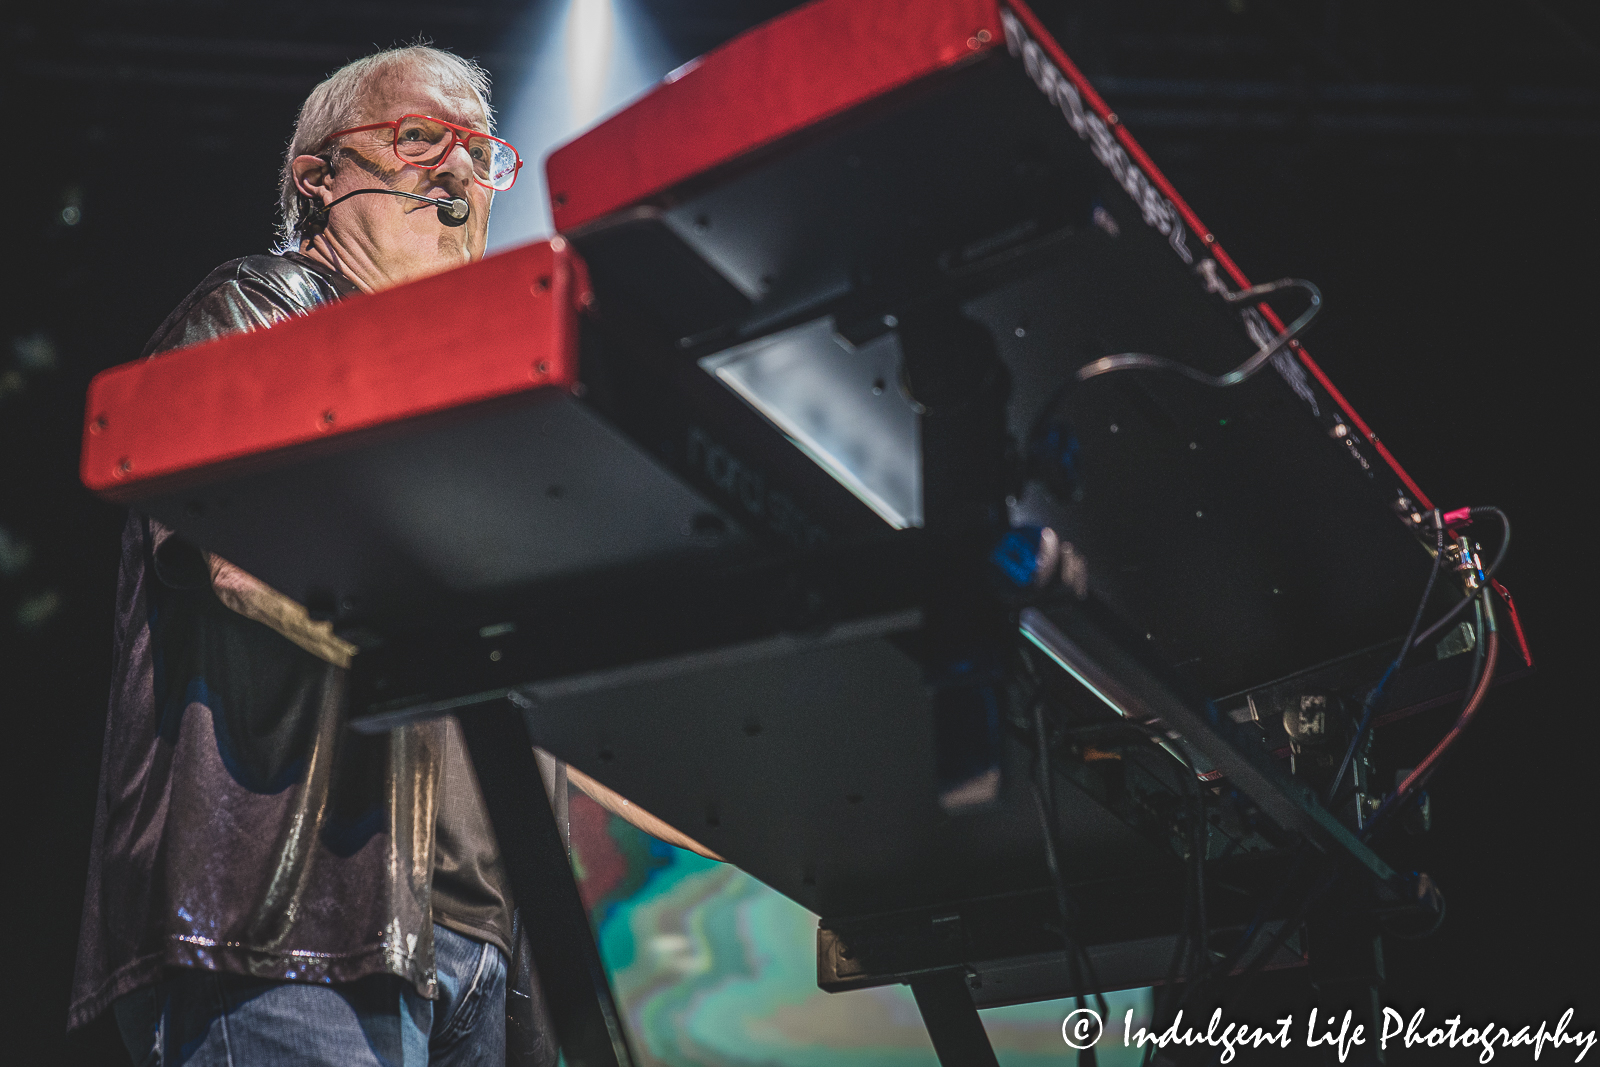 Keyboard player Dennis Laffoon performing live at Star Pavilion inside of Ameristar Casino in Kansas City, MO on April 9, 2022.